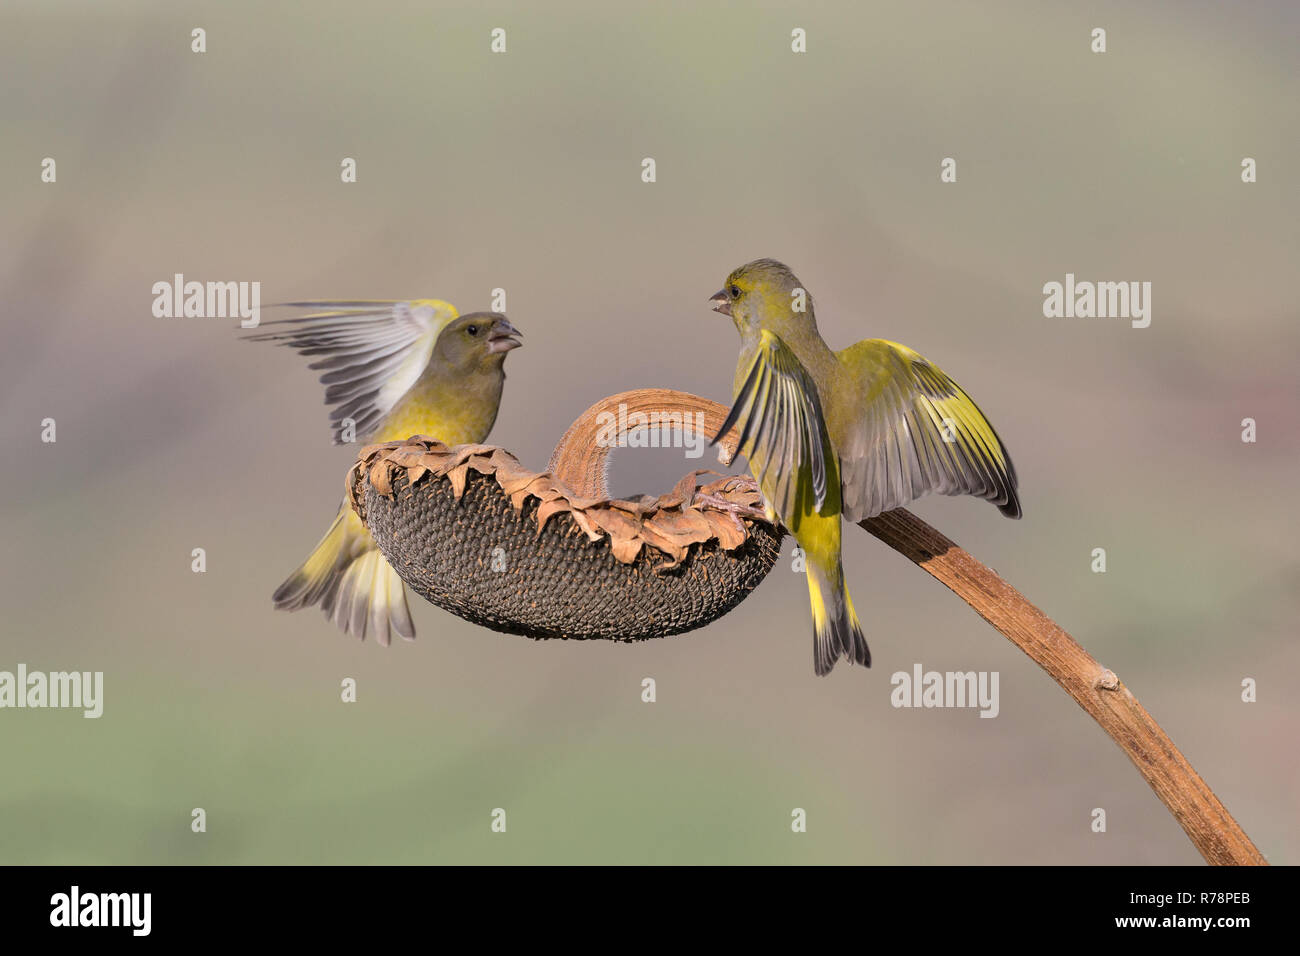 European greenfinch in fight over sunflower, Italy Stock Photo